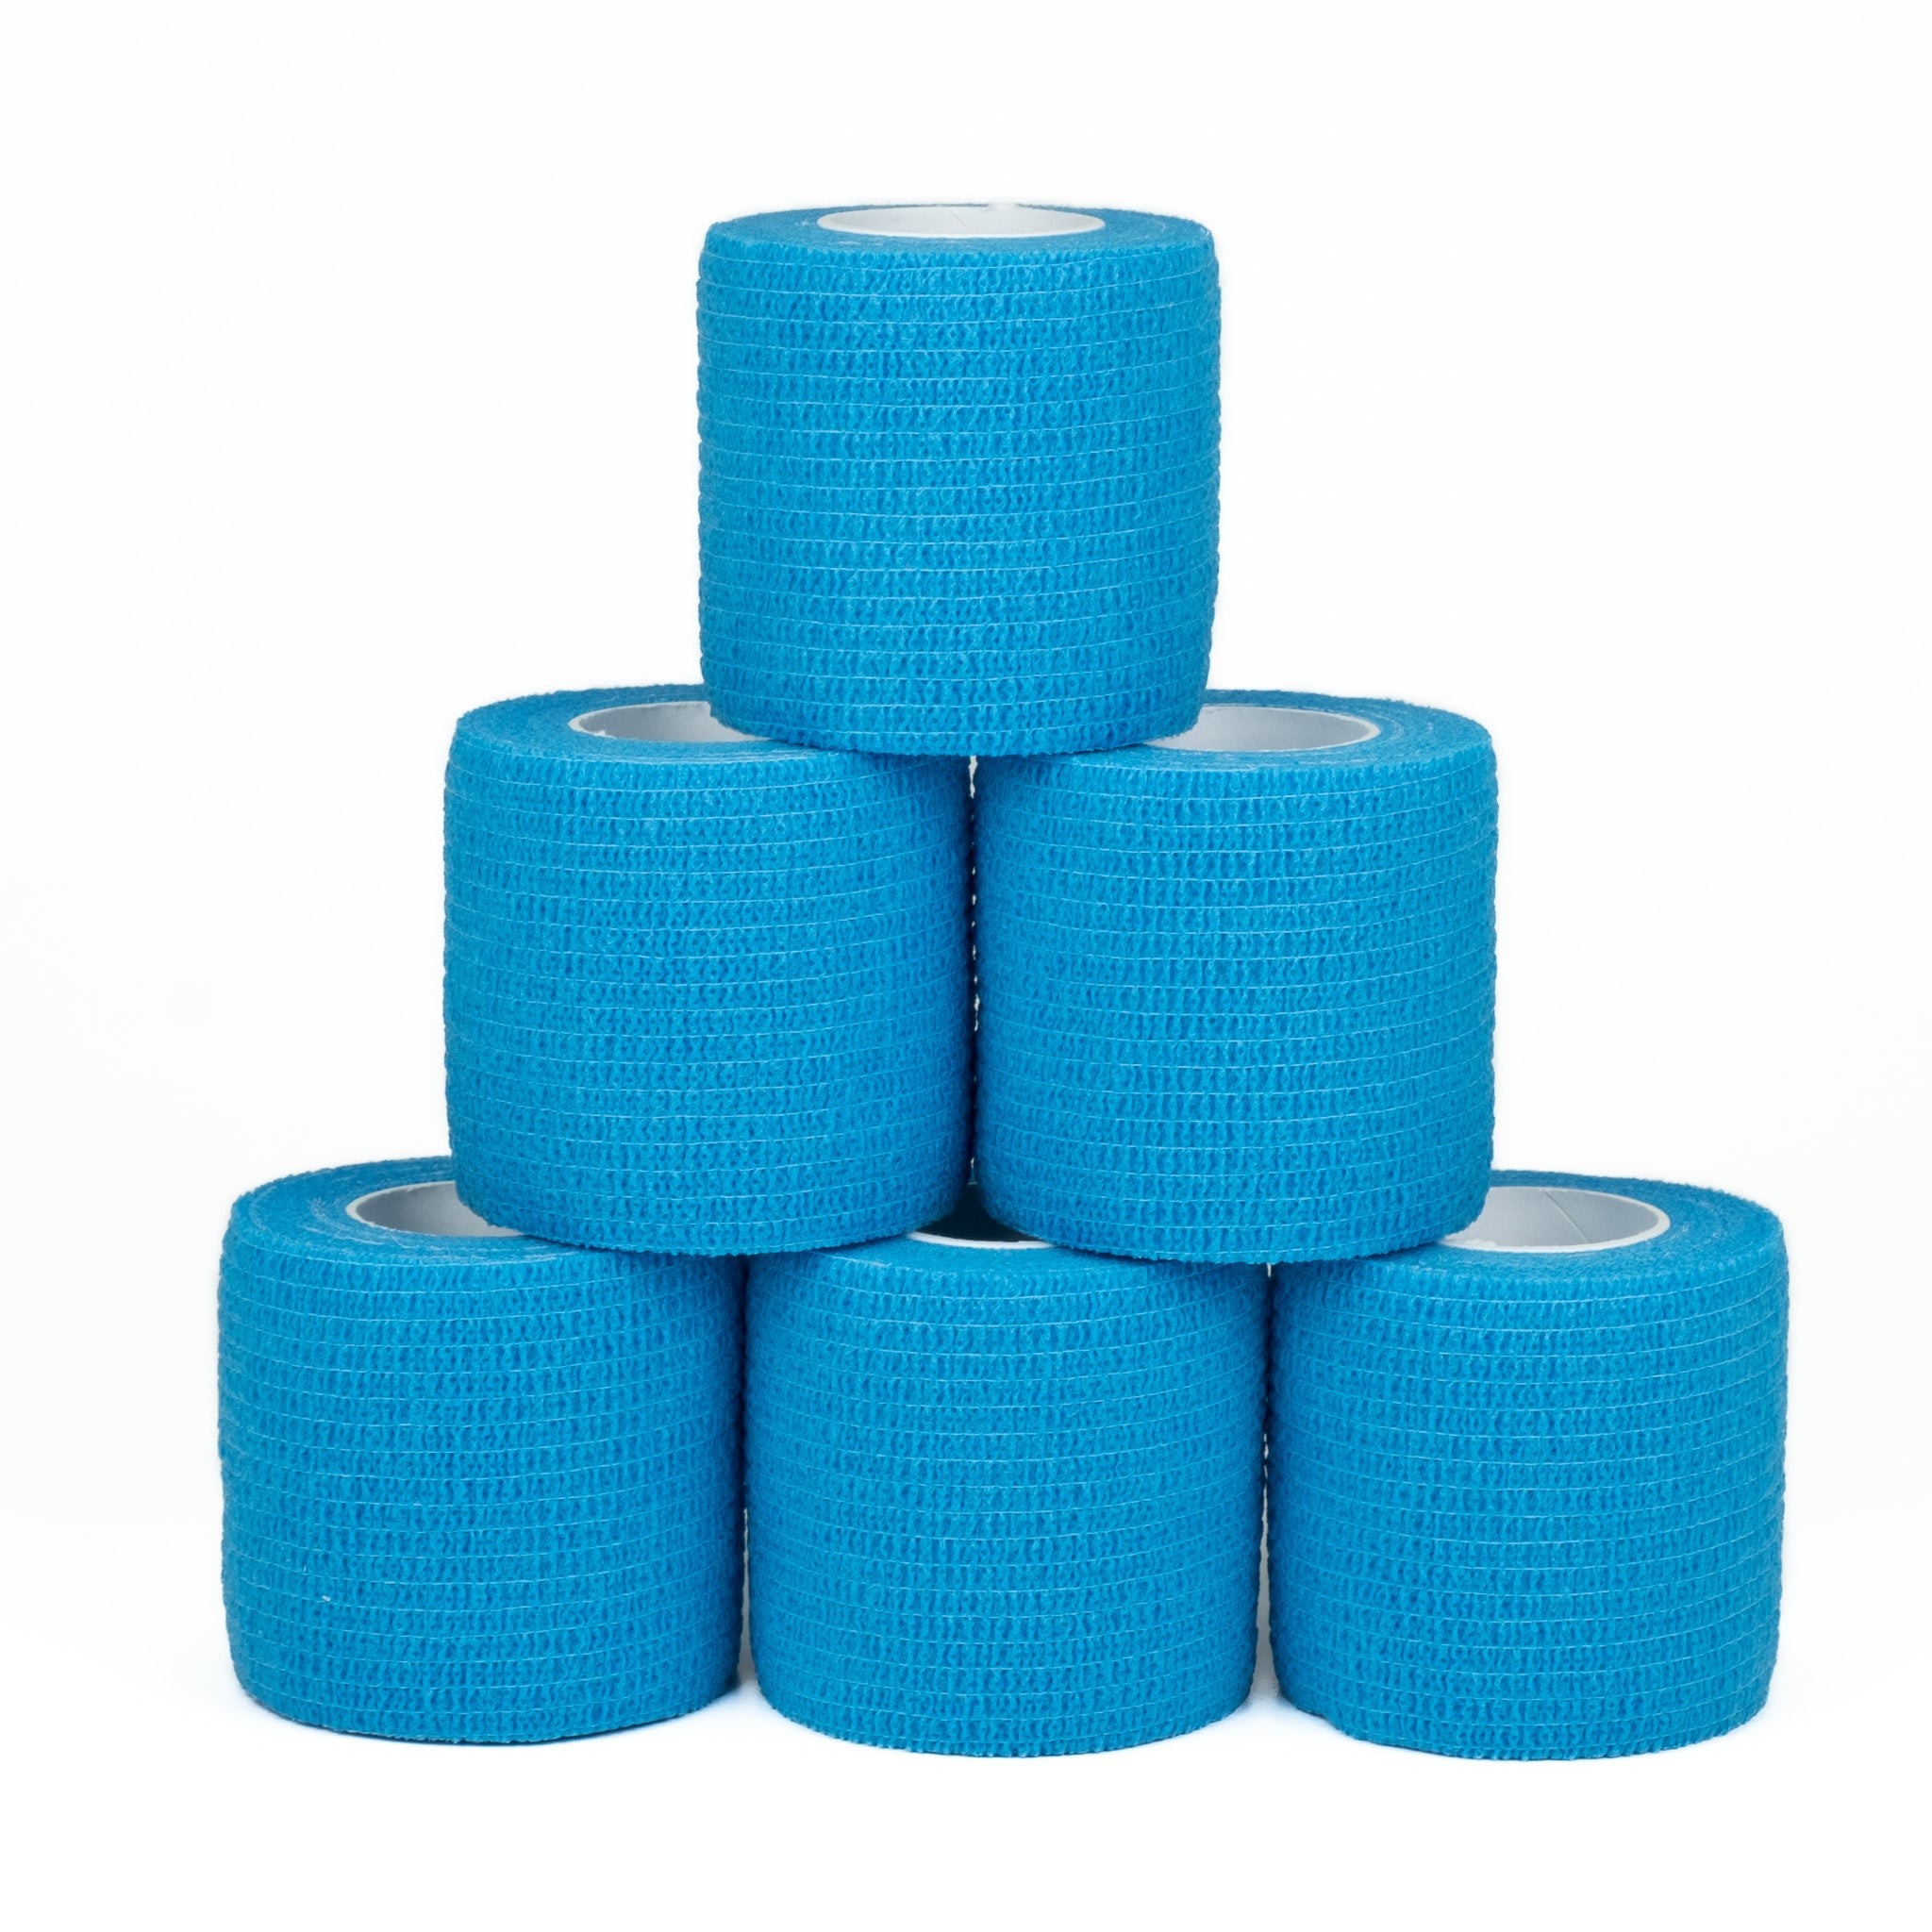 6 blue rolls of cohesive tape